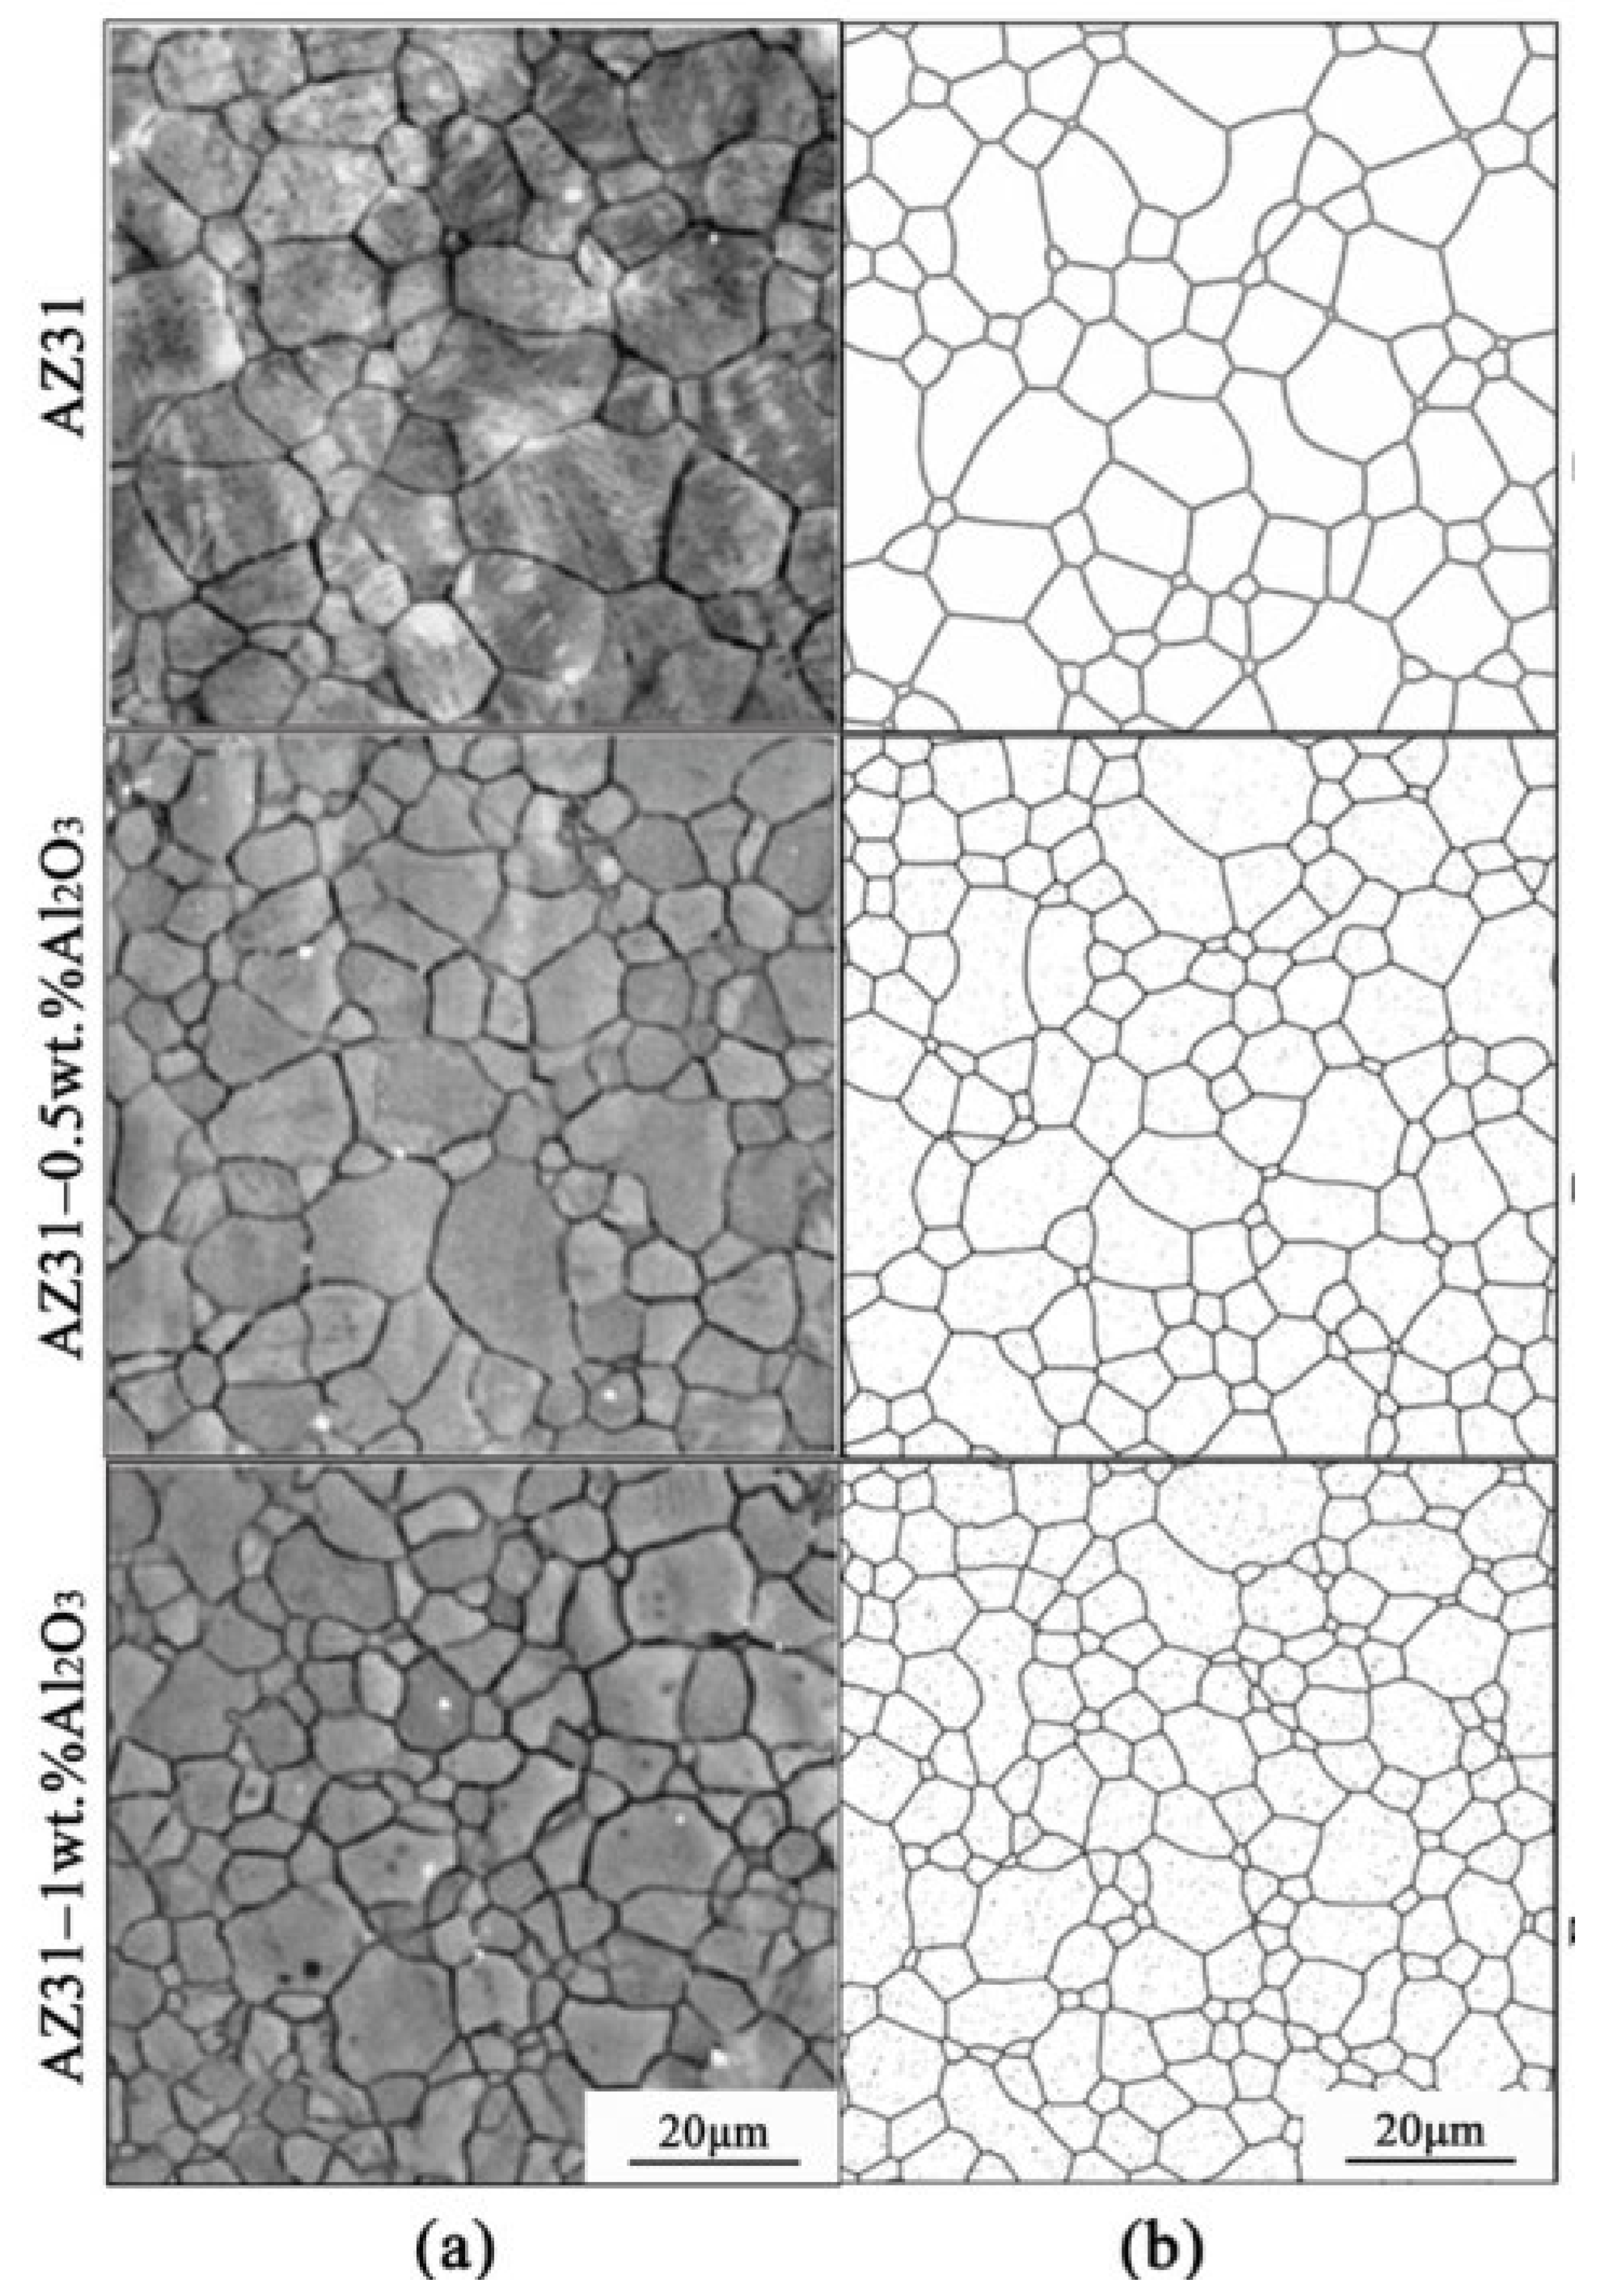 Crystals | Free Full-Text | Simulation of Microstructure Evolution in ...